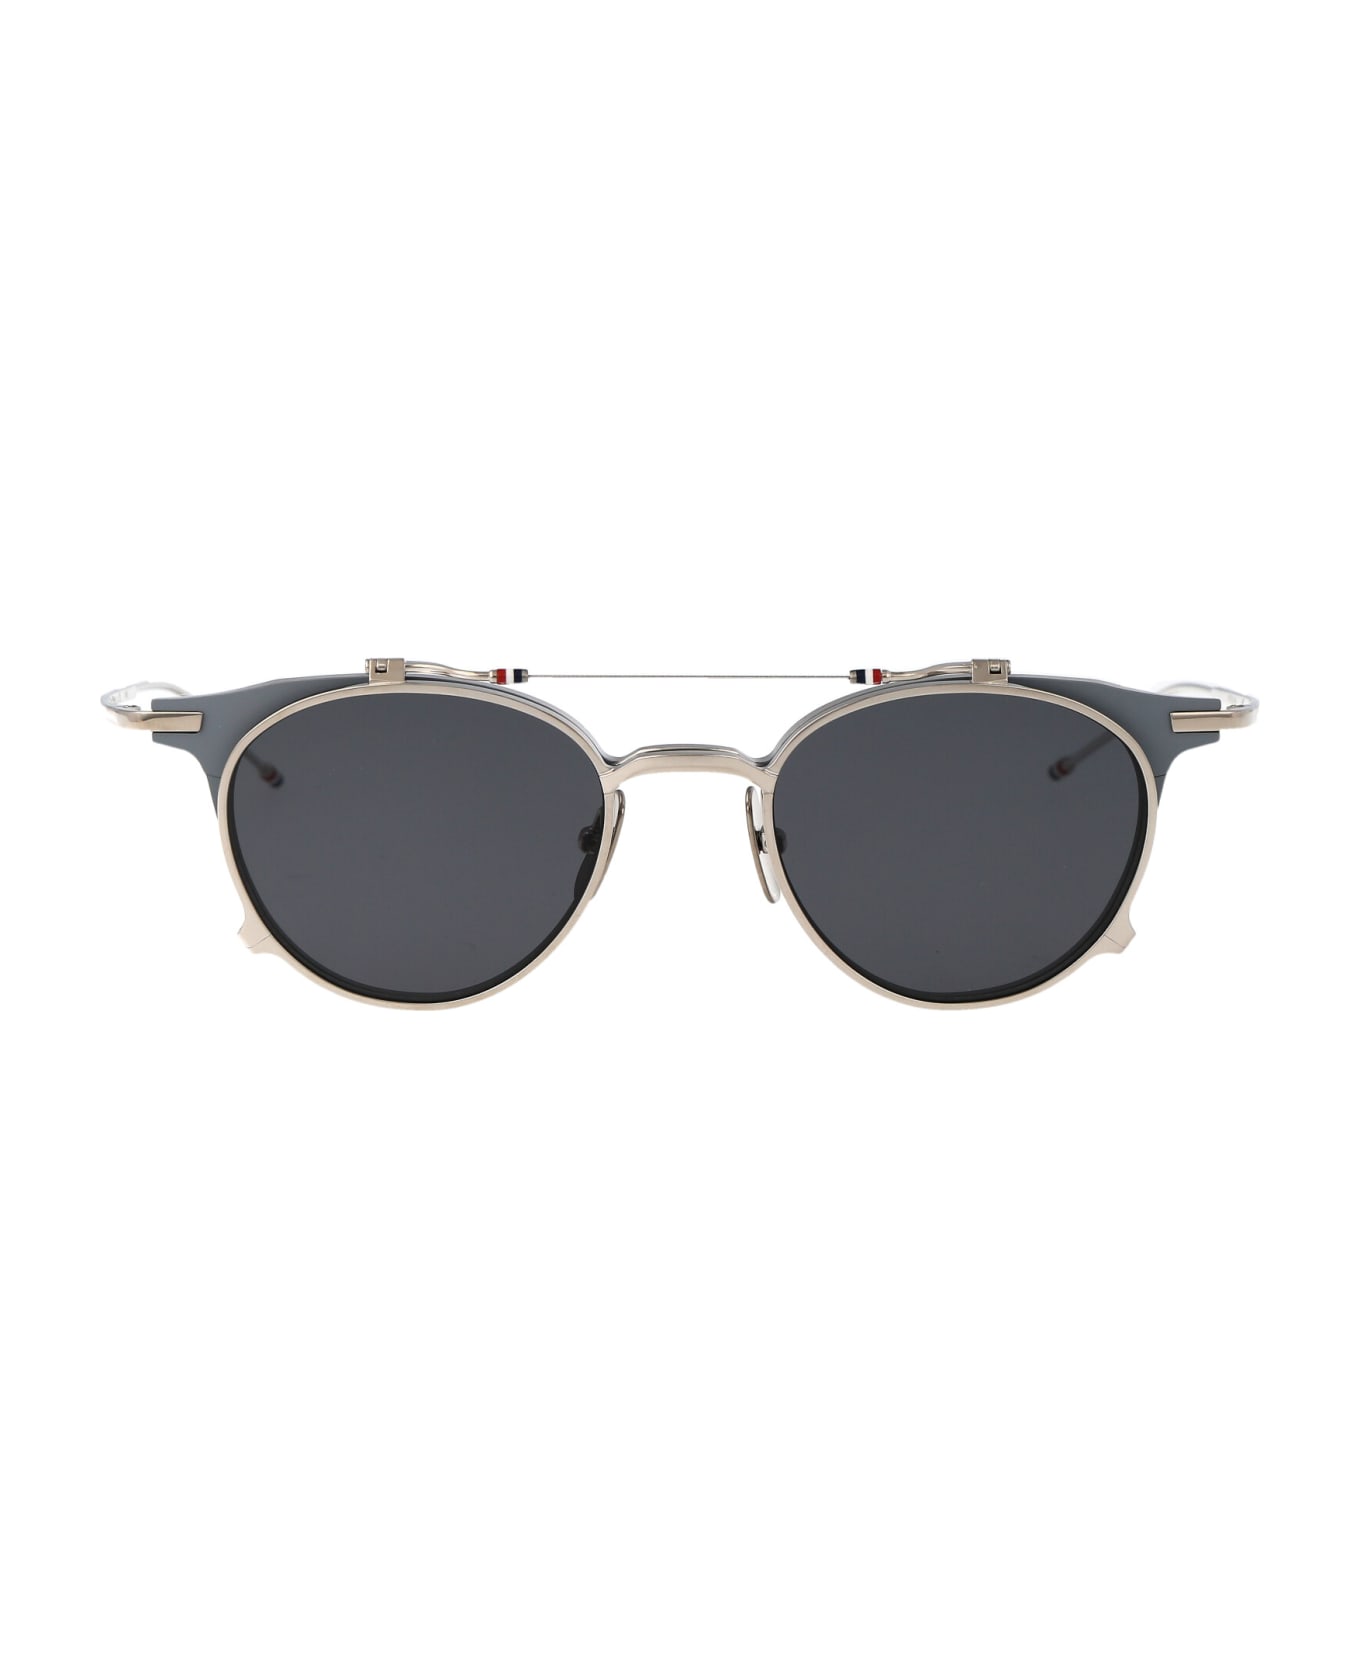 Thom Browne Ues814a-g0001-045-49 Sunglasses - 045 SILVER サングラス